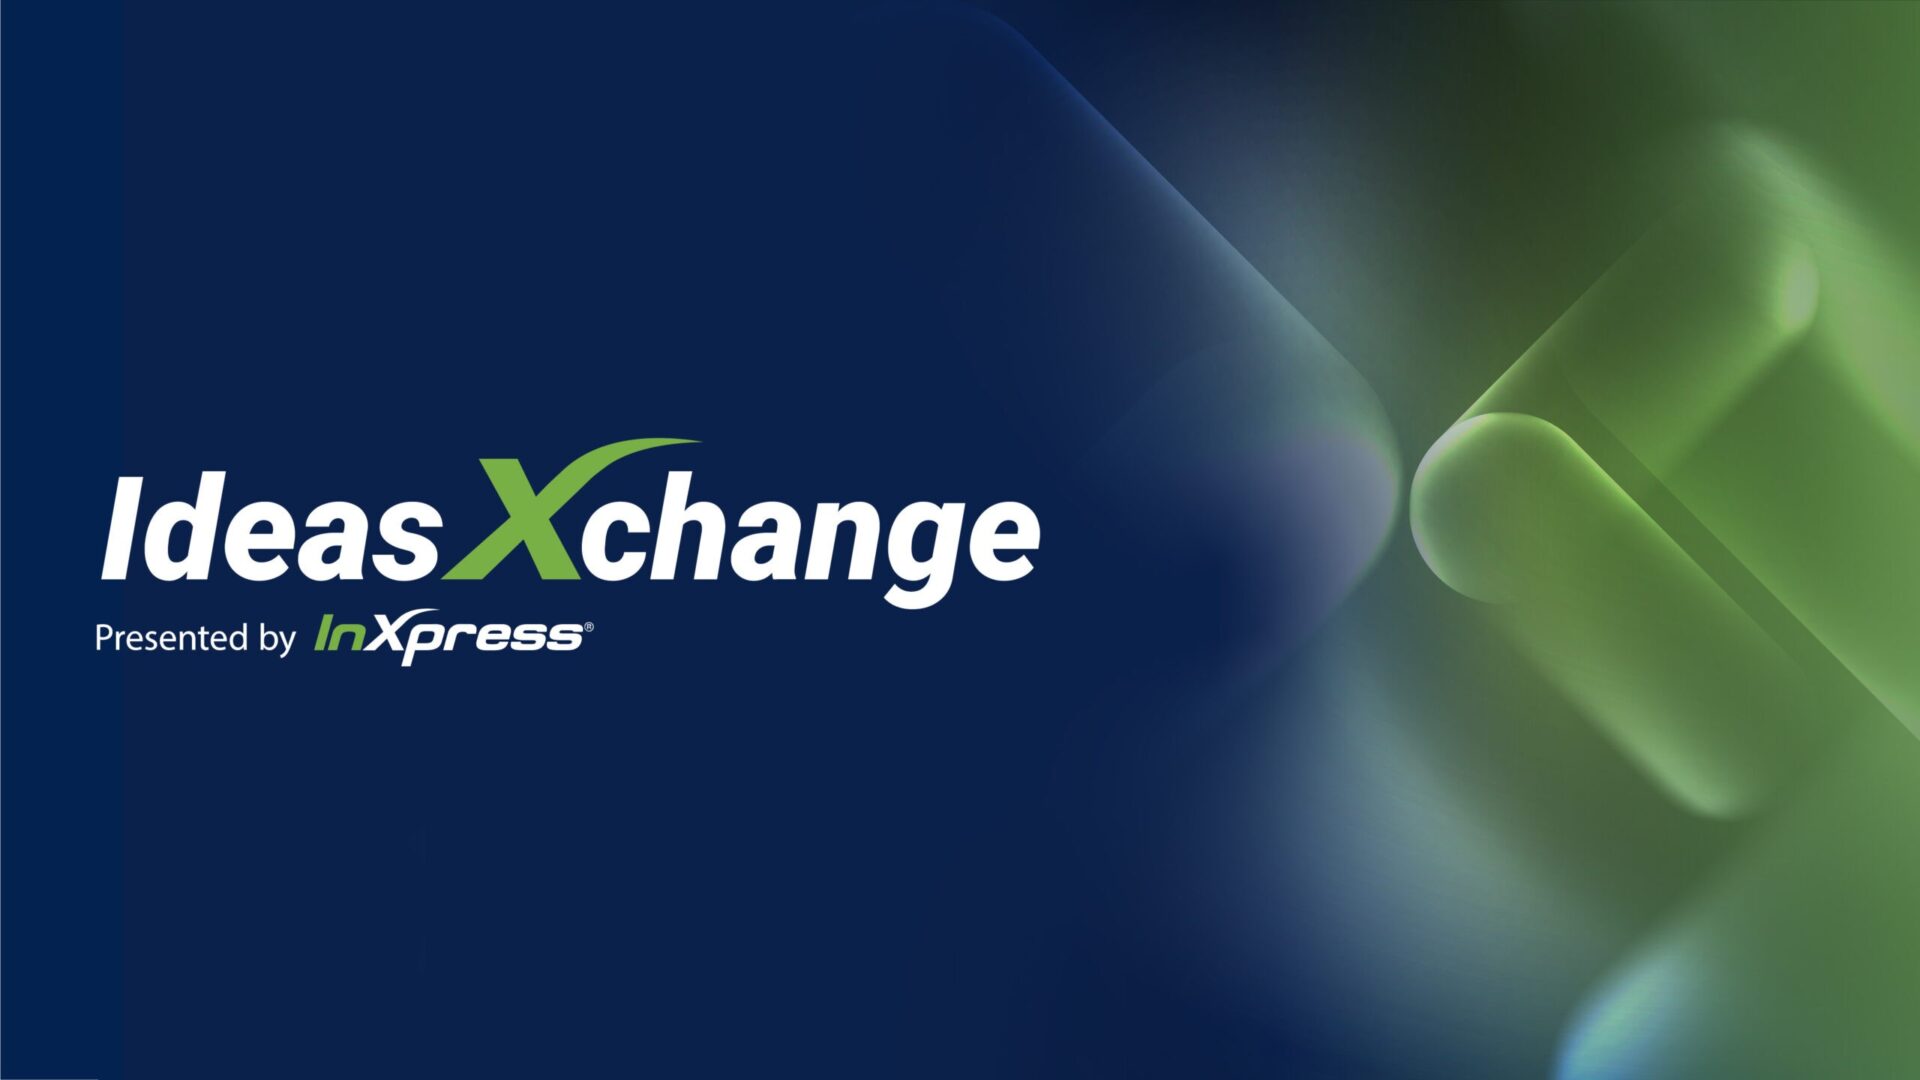 InXpress Launches Ideas Xchange Podcast